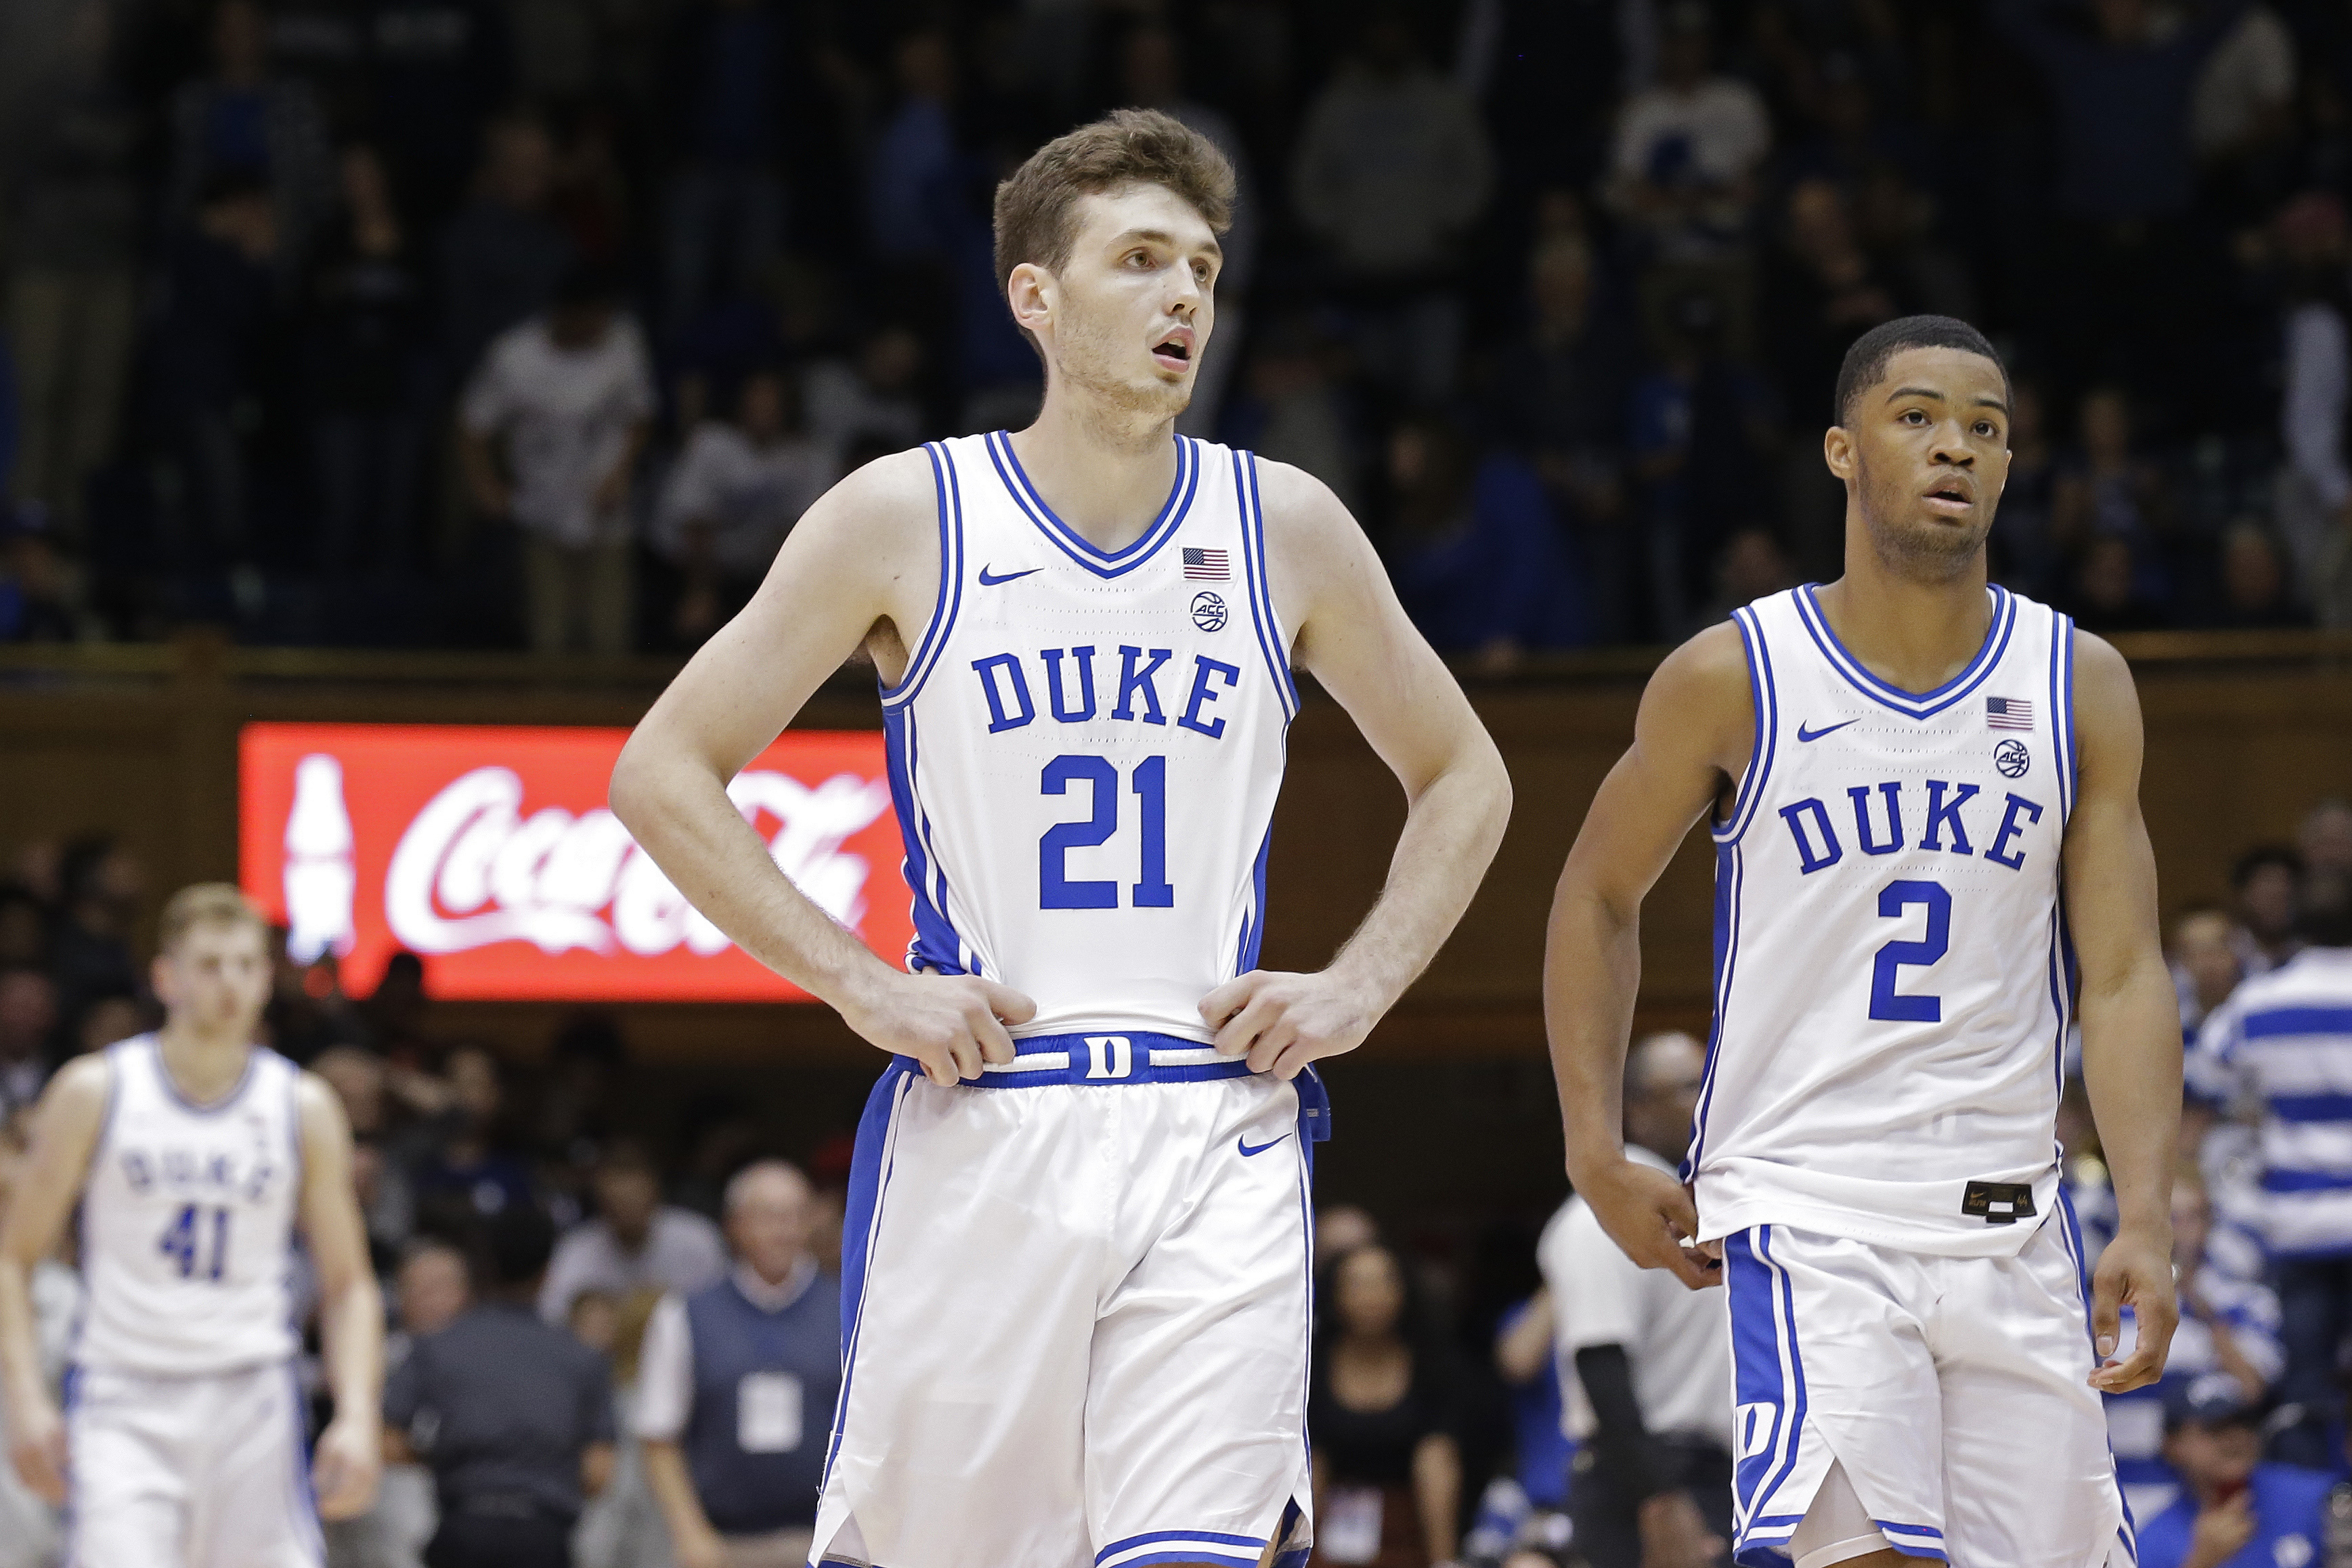 No. 1 Duke stunned by Stephen F. Austin at home